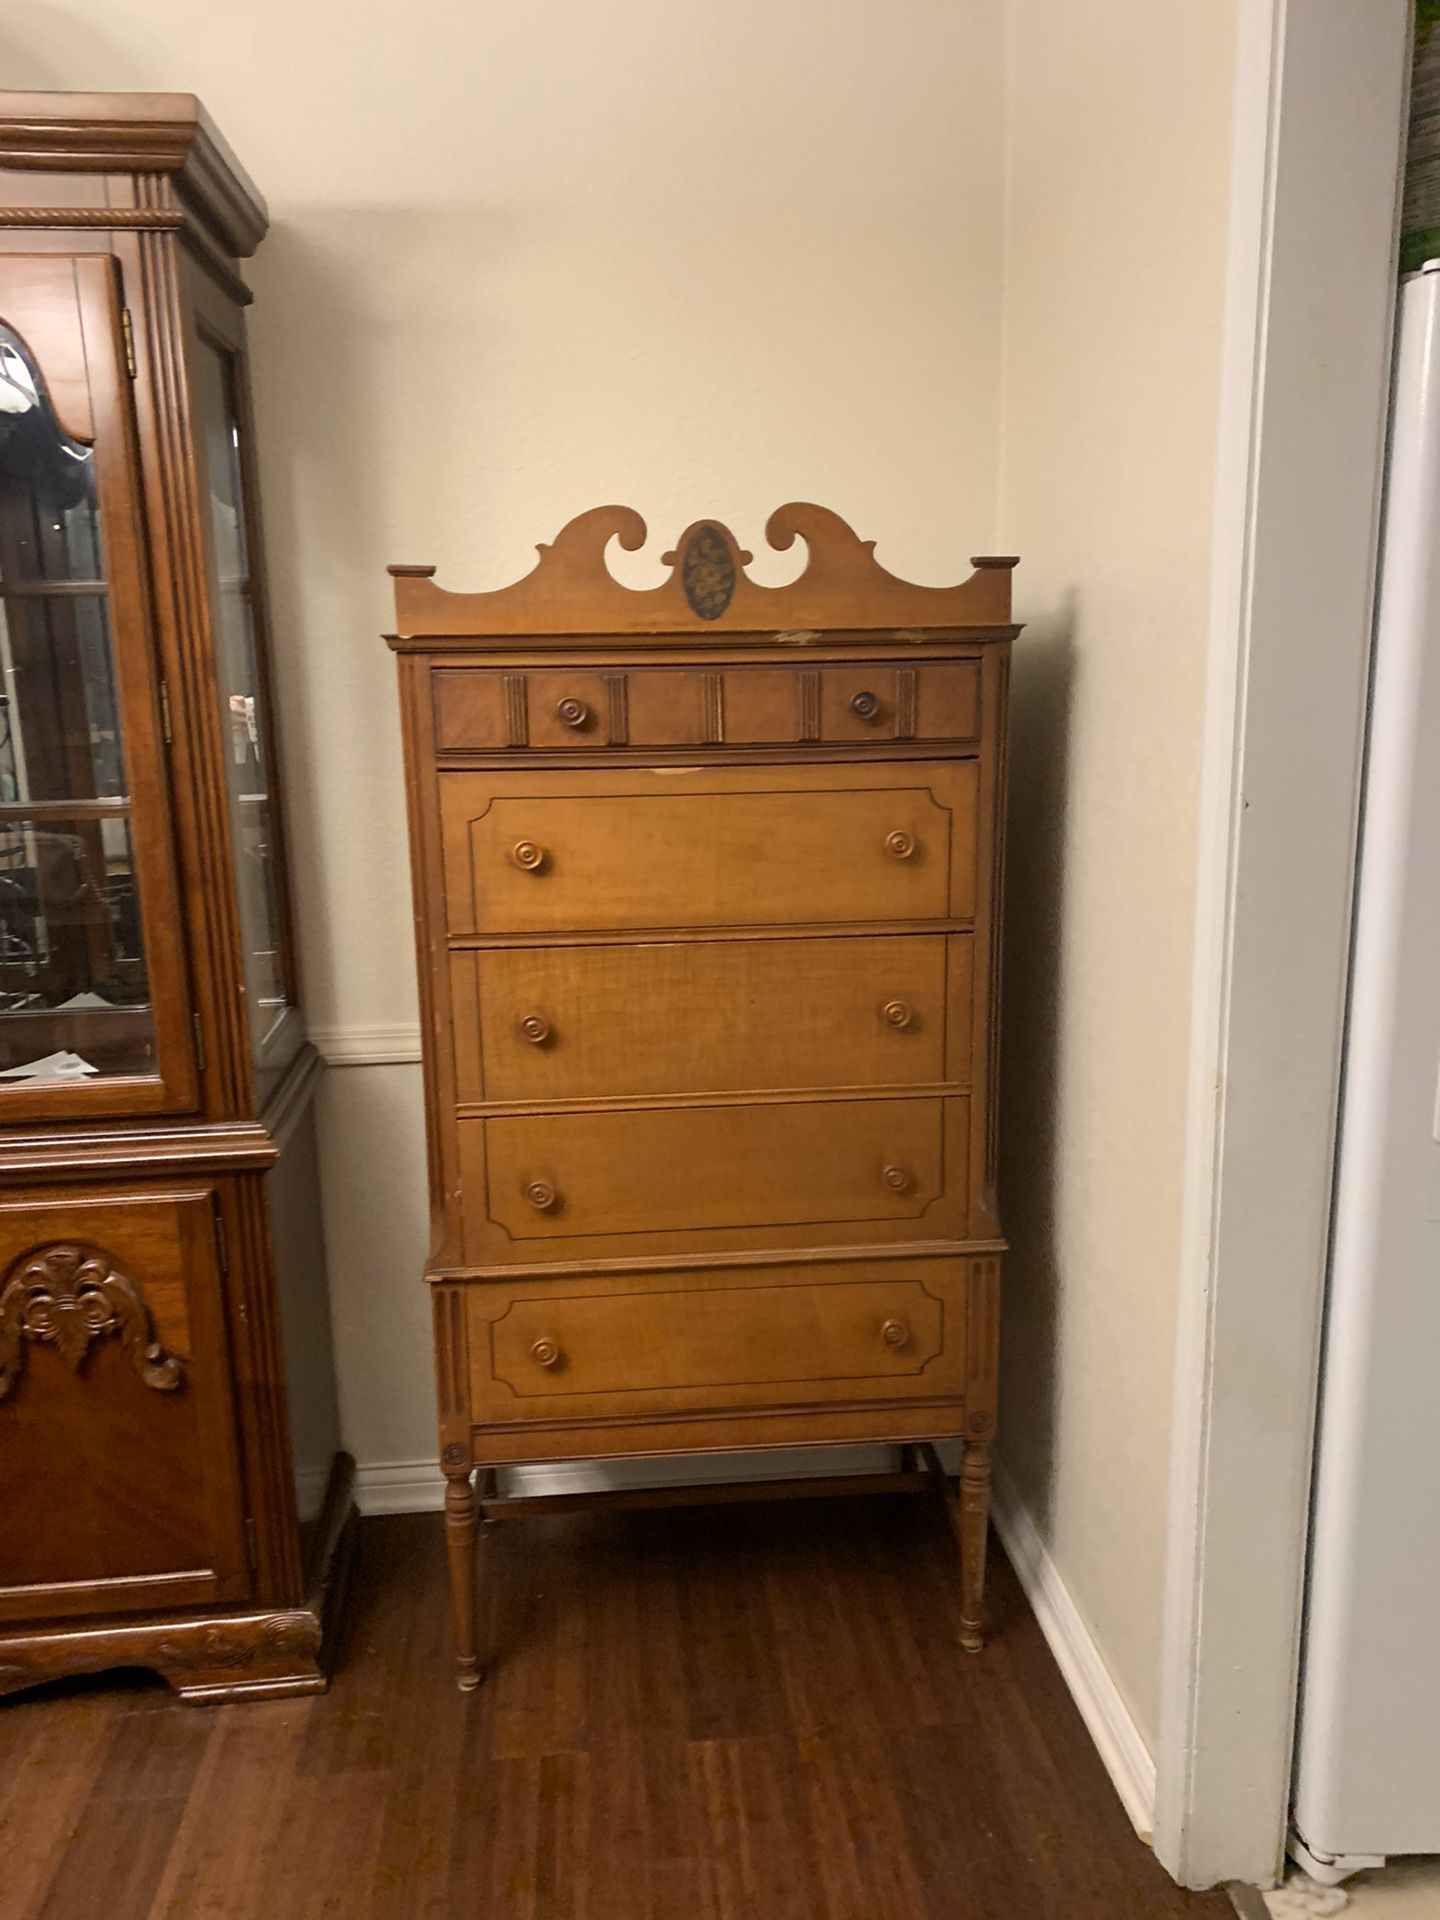 Antique dresser not sure how old. In great condition